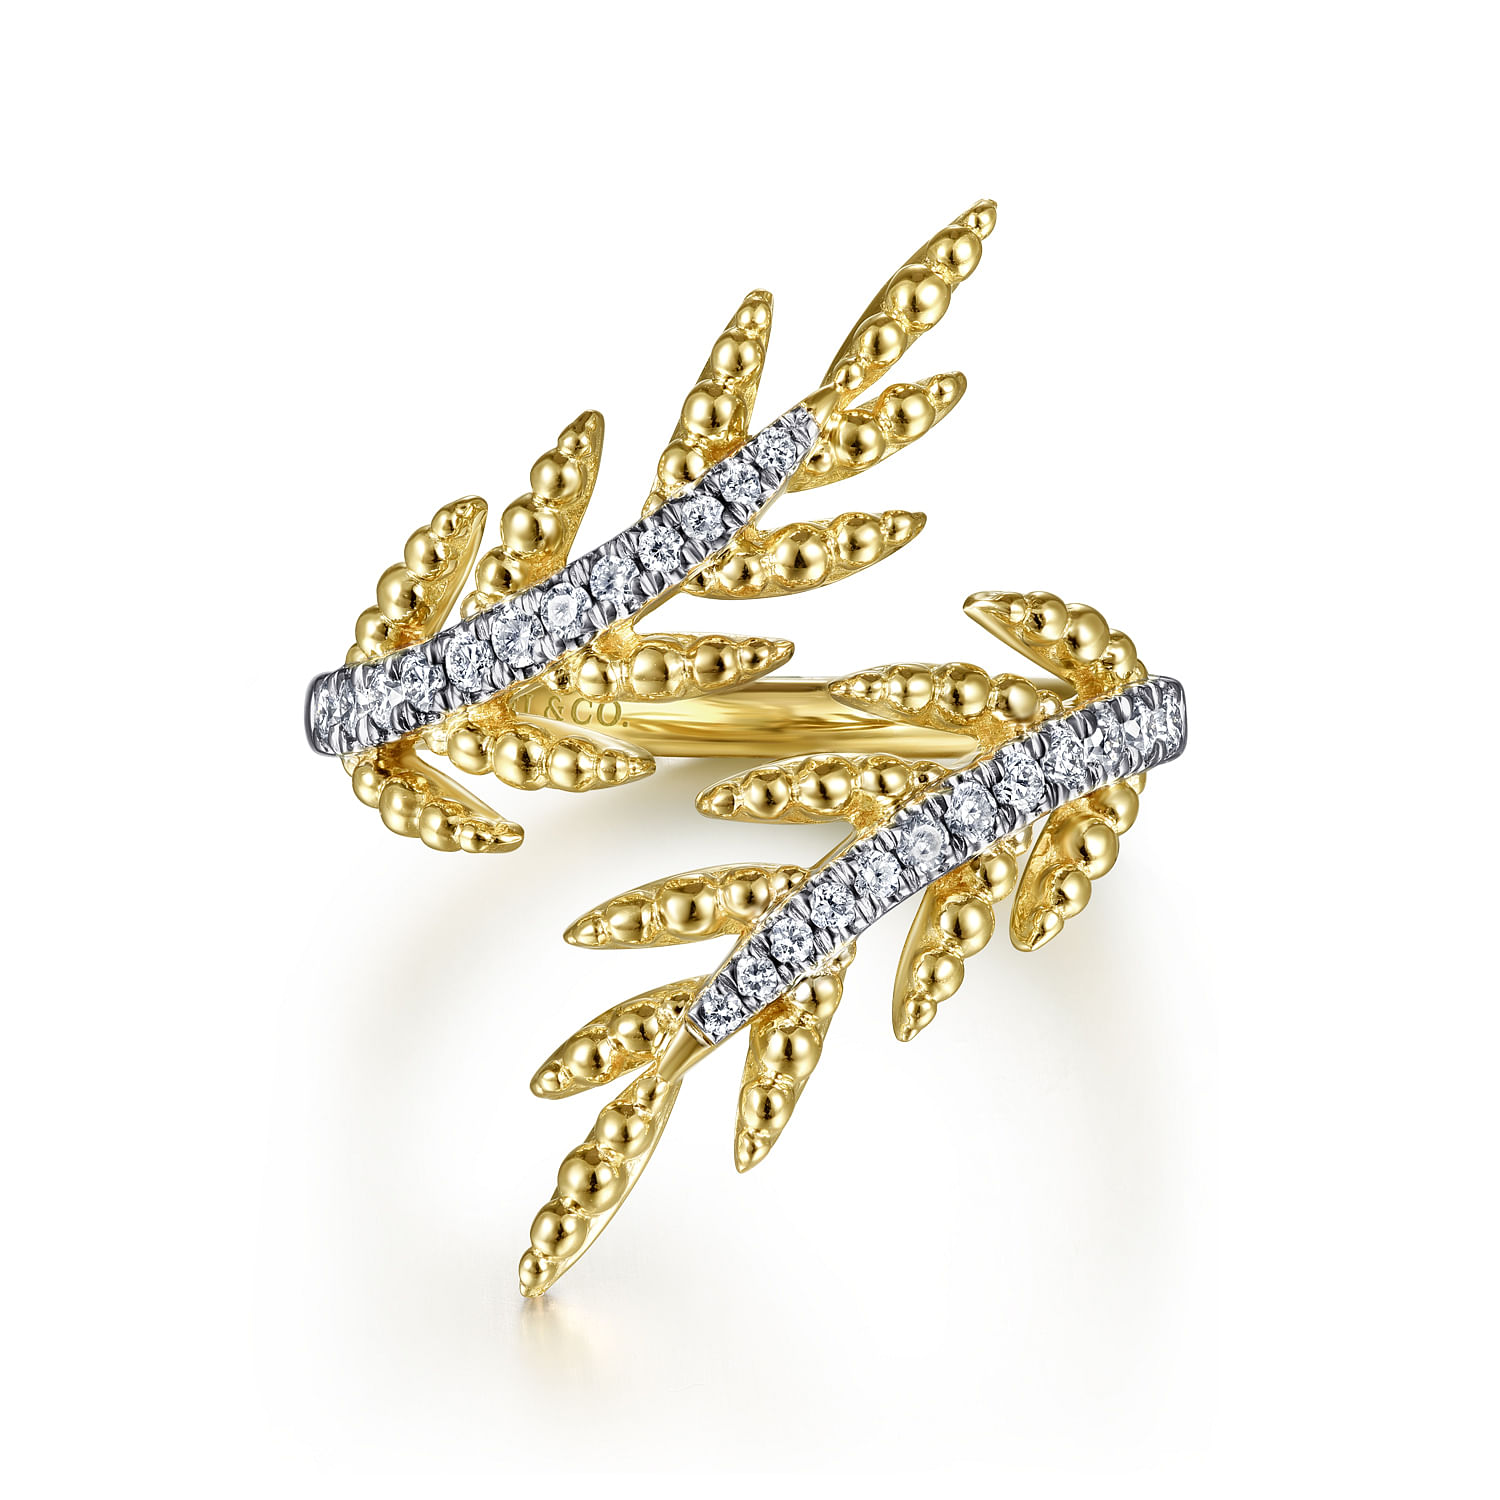 14K Yellow Gold Olive Branch Bypass Ring with Diamonds